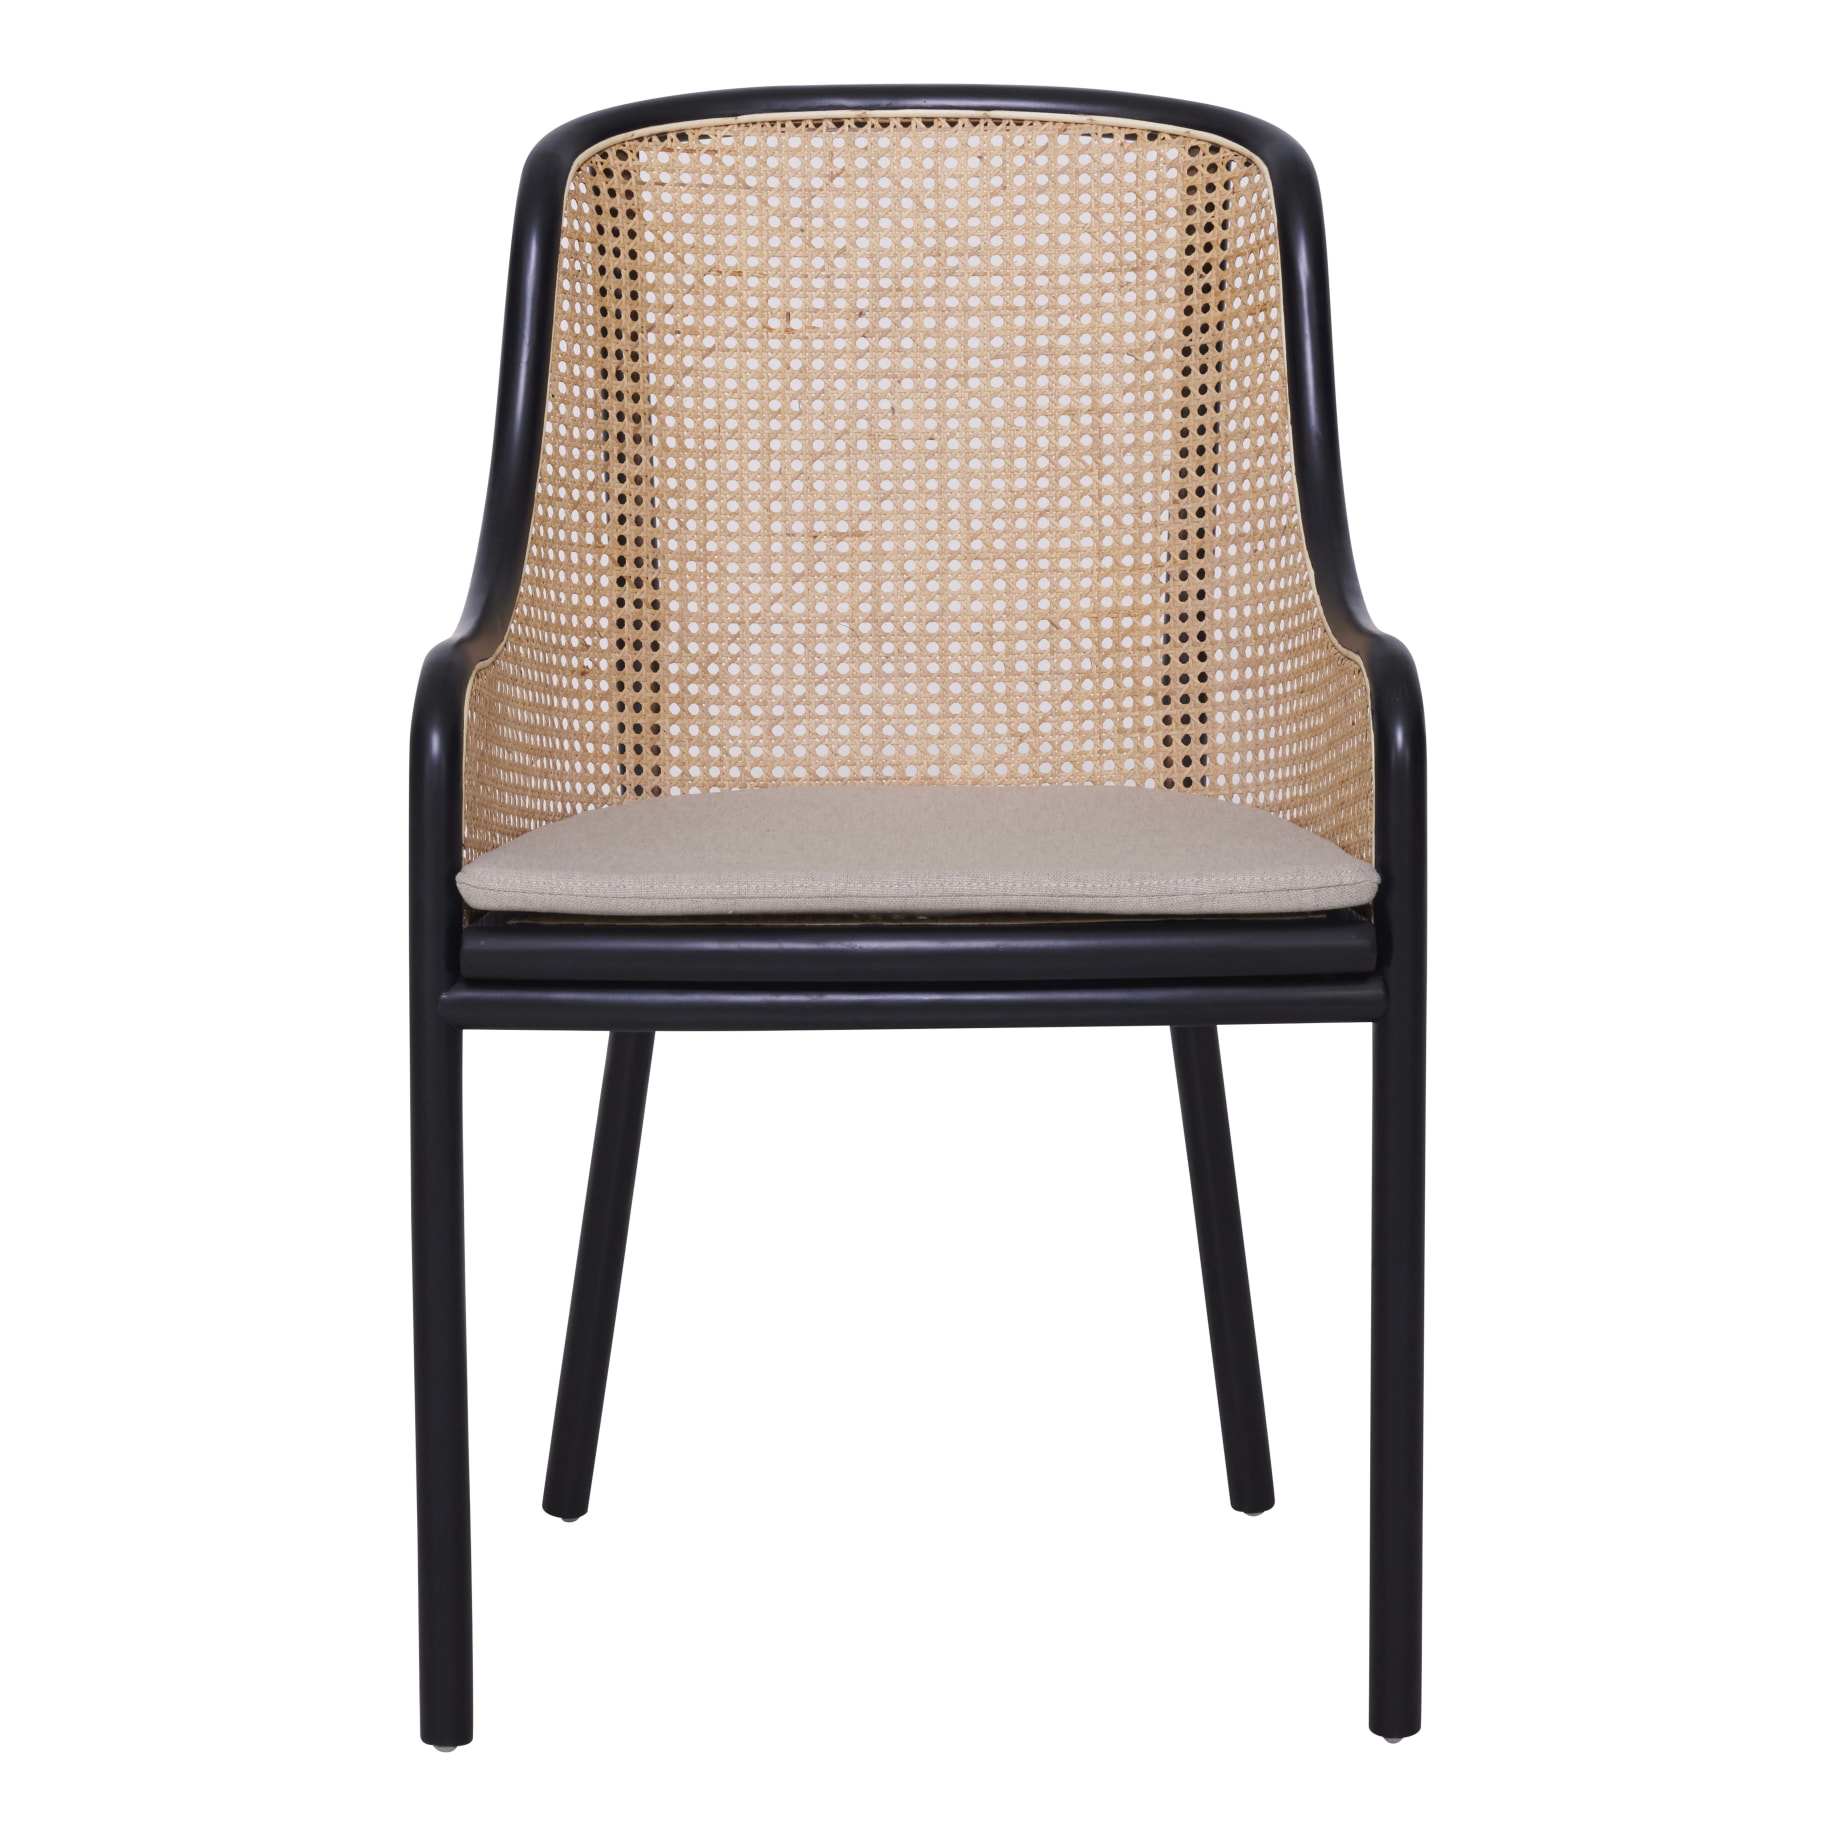 Totti Chair in Black Frame/Natural Wicker